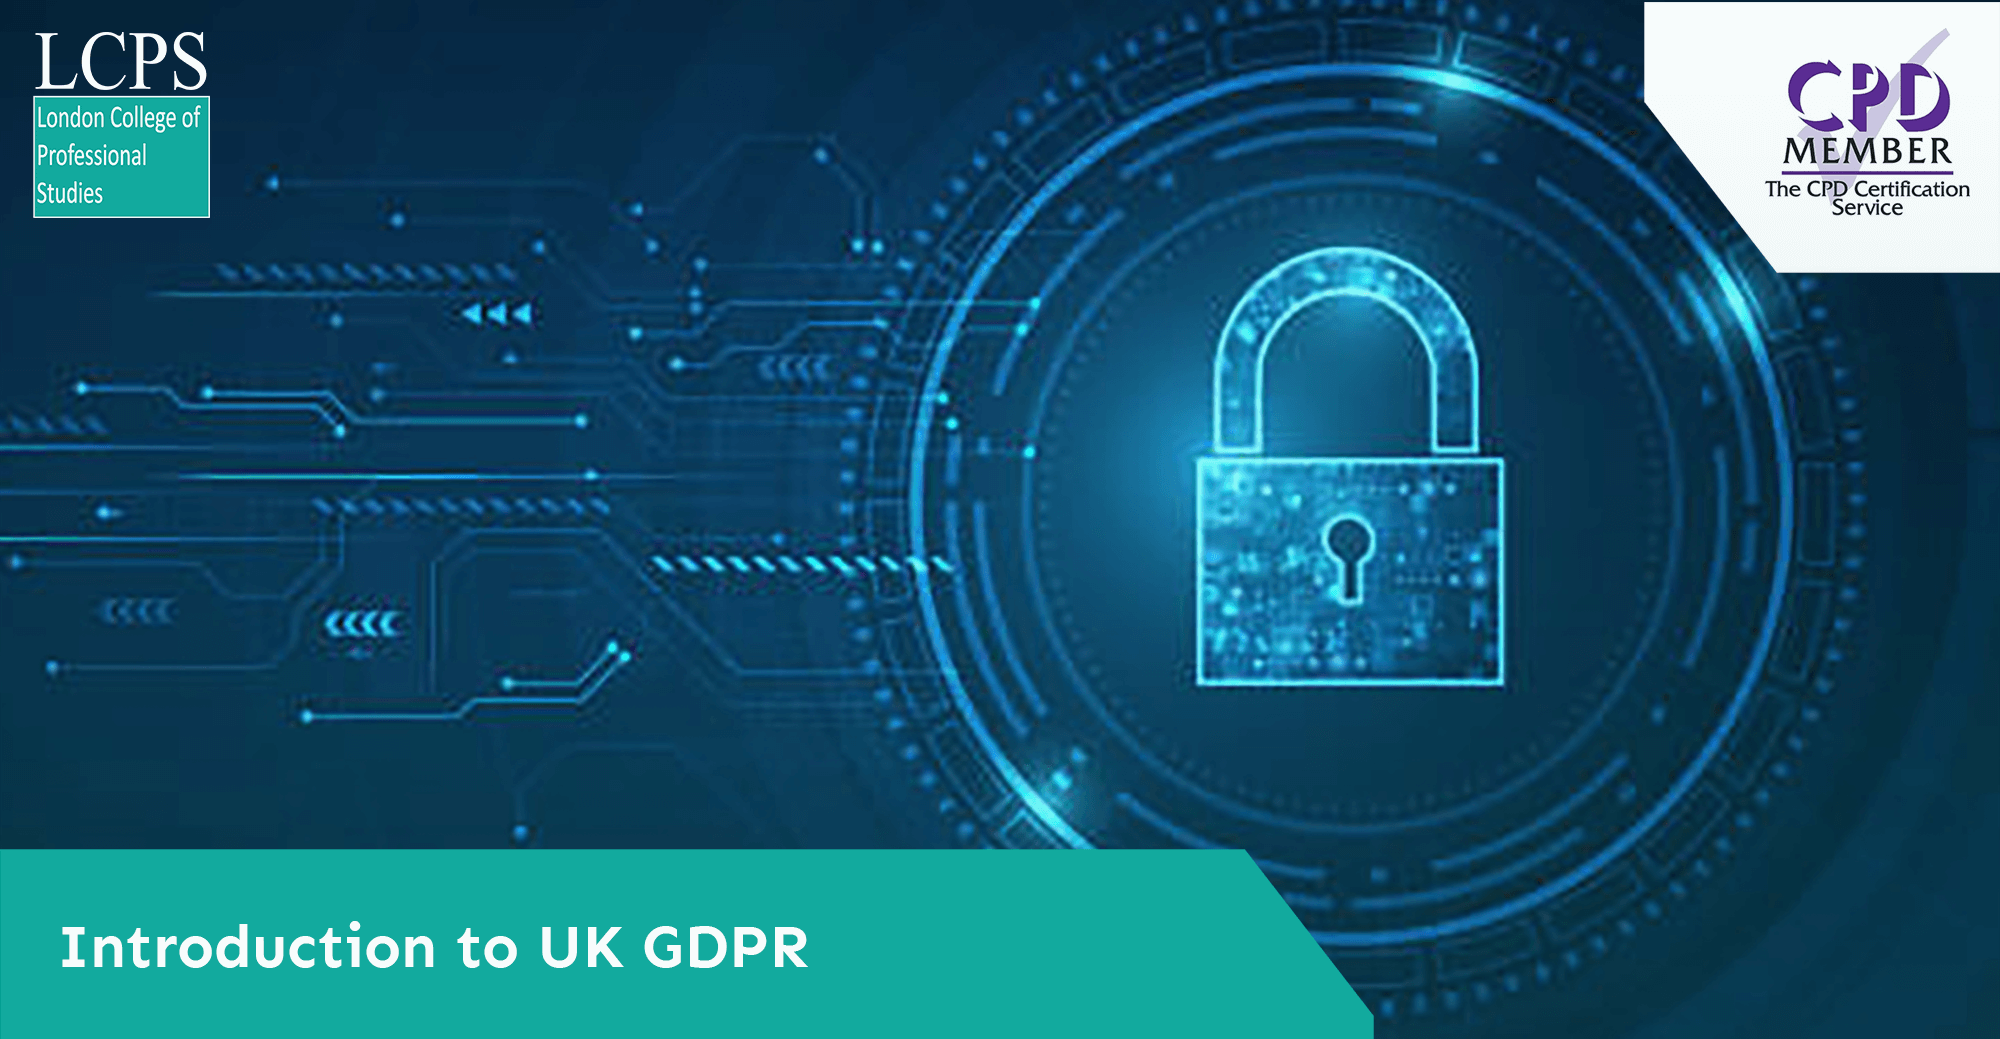 Introduction to UK GDPR